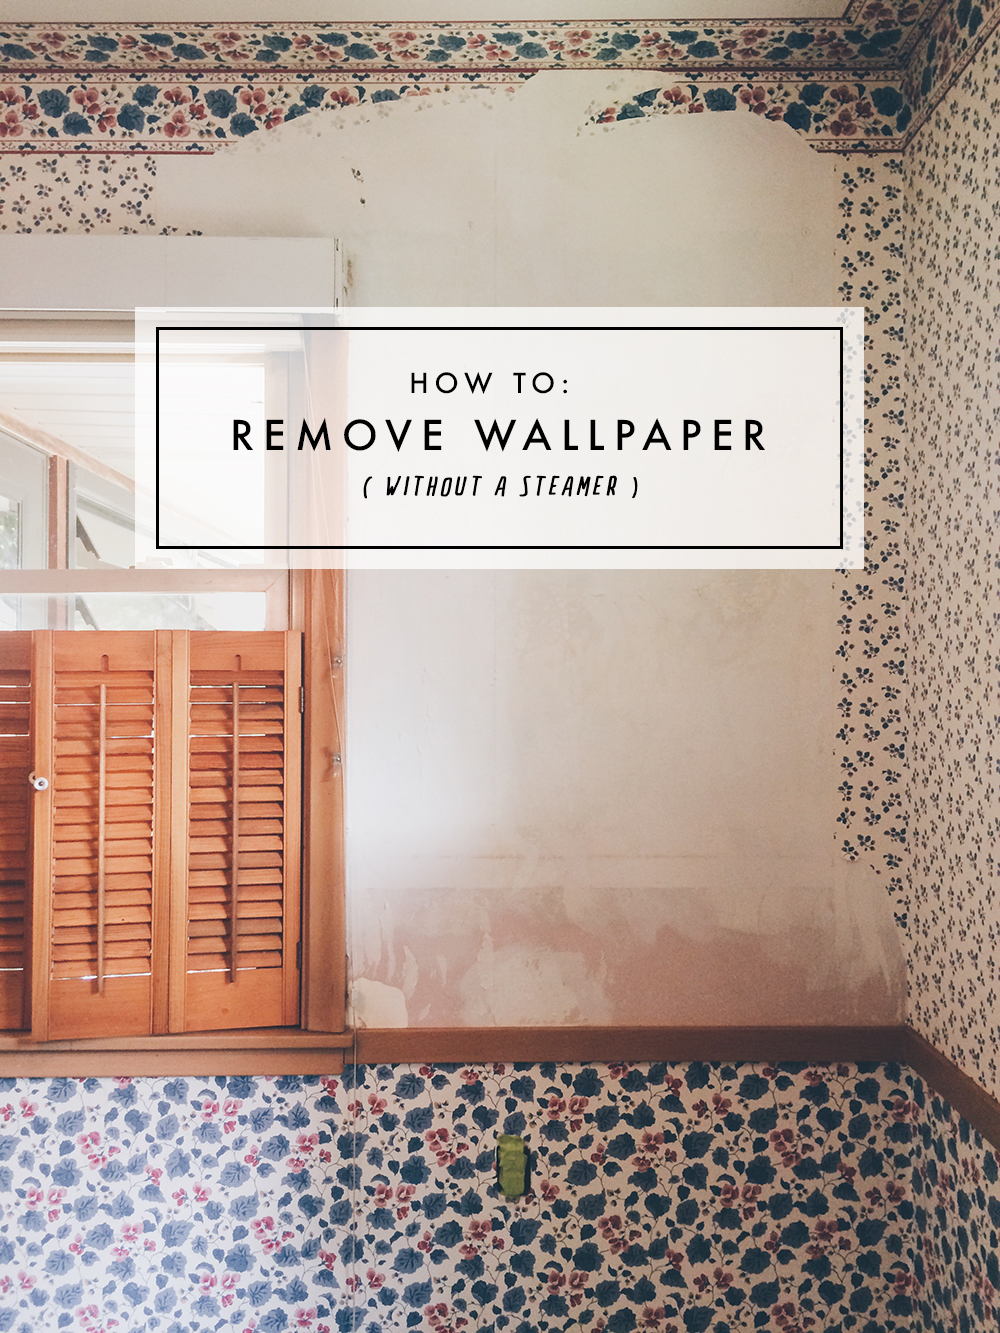 Remove Wallpaper Without a Steamer